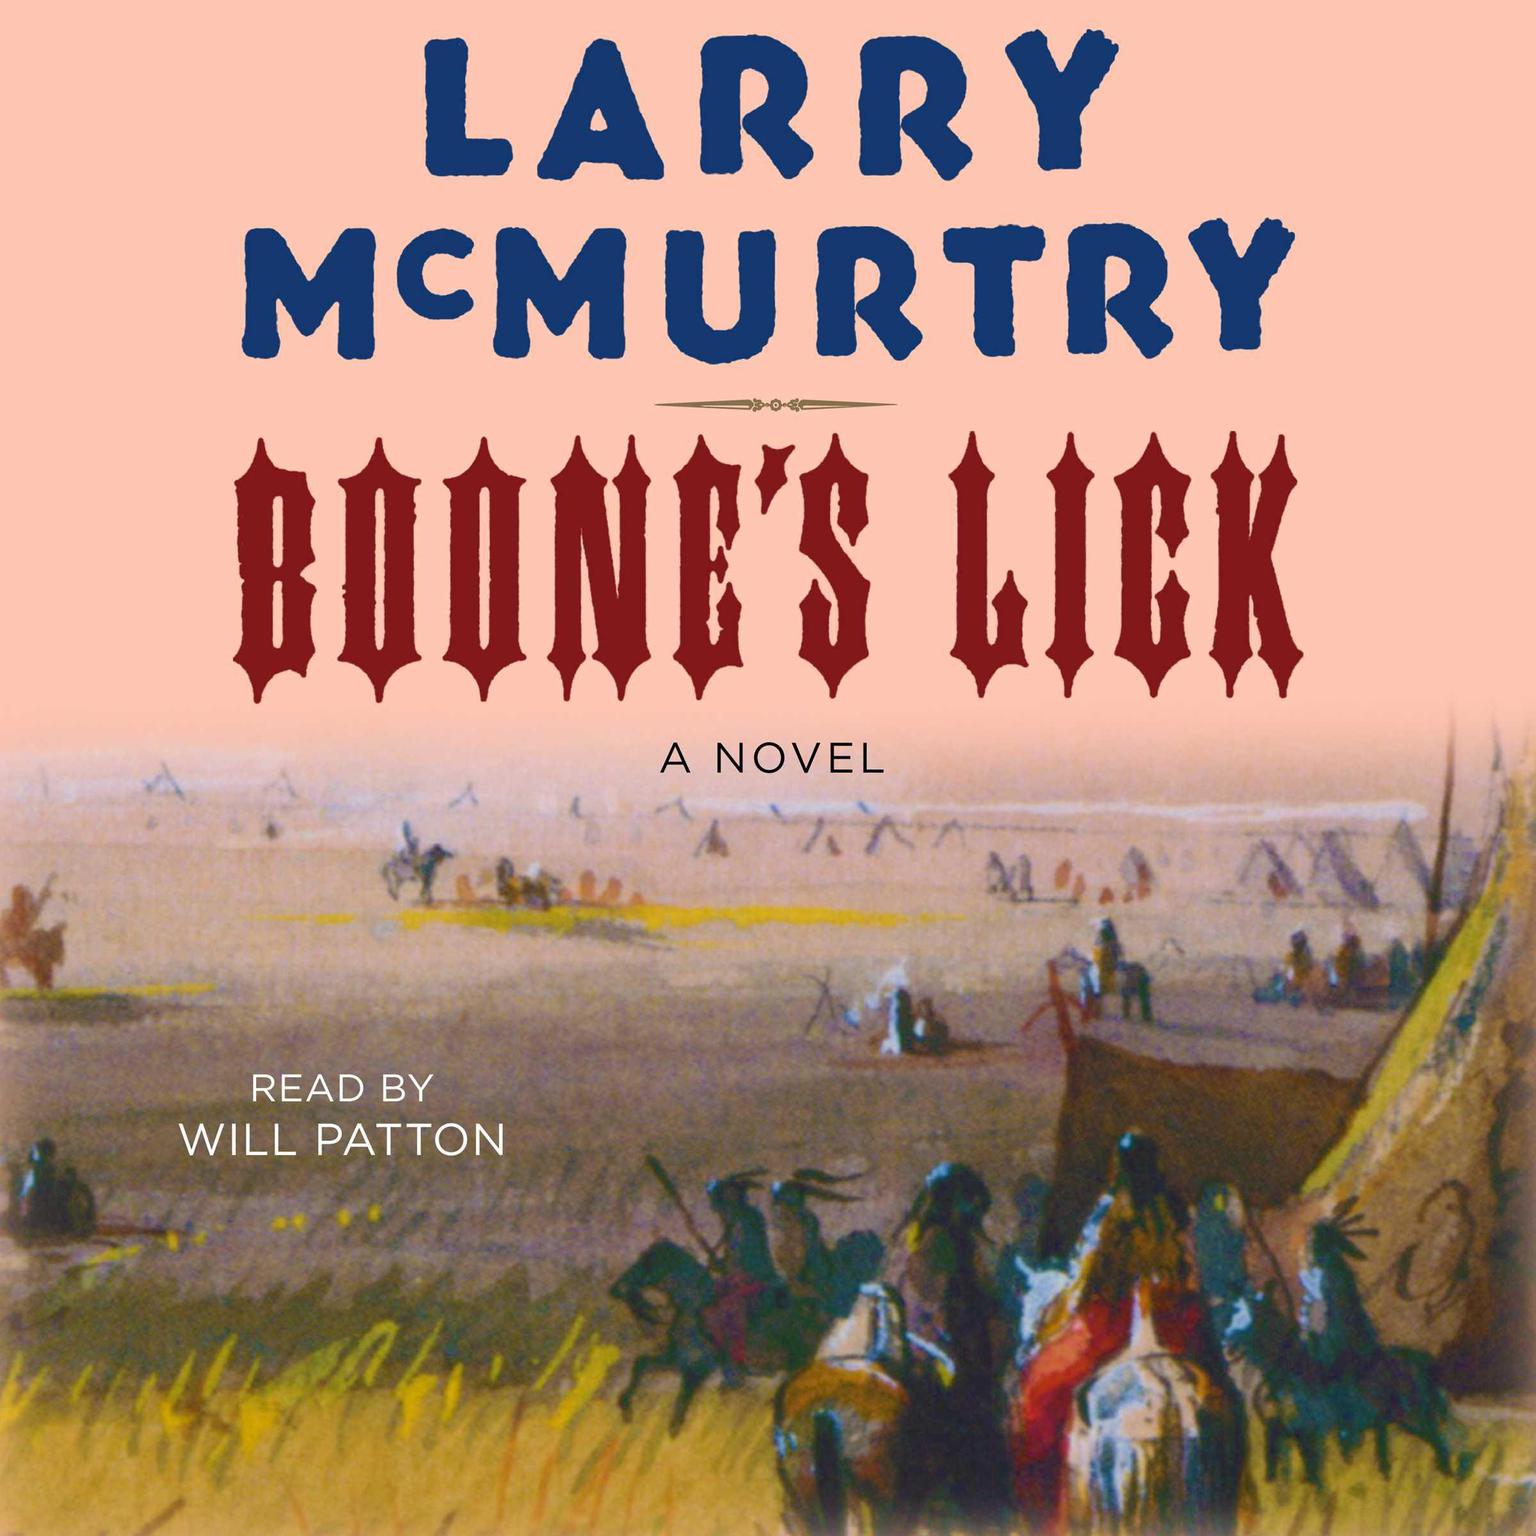 Boones Lick Audiobook, by Larry McMurtry